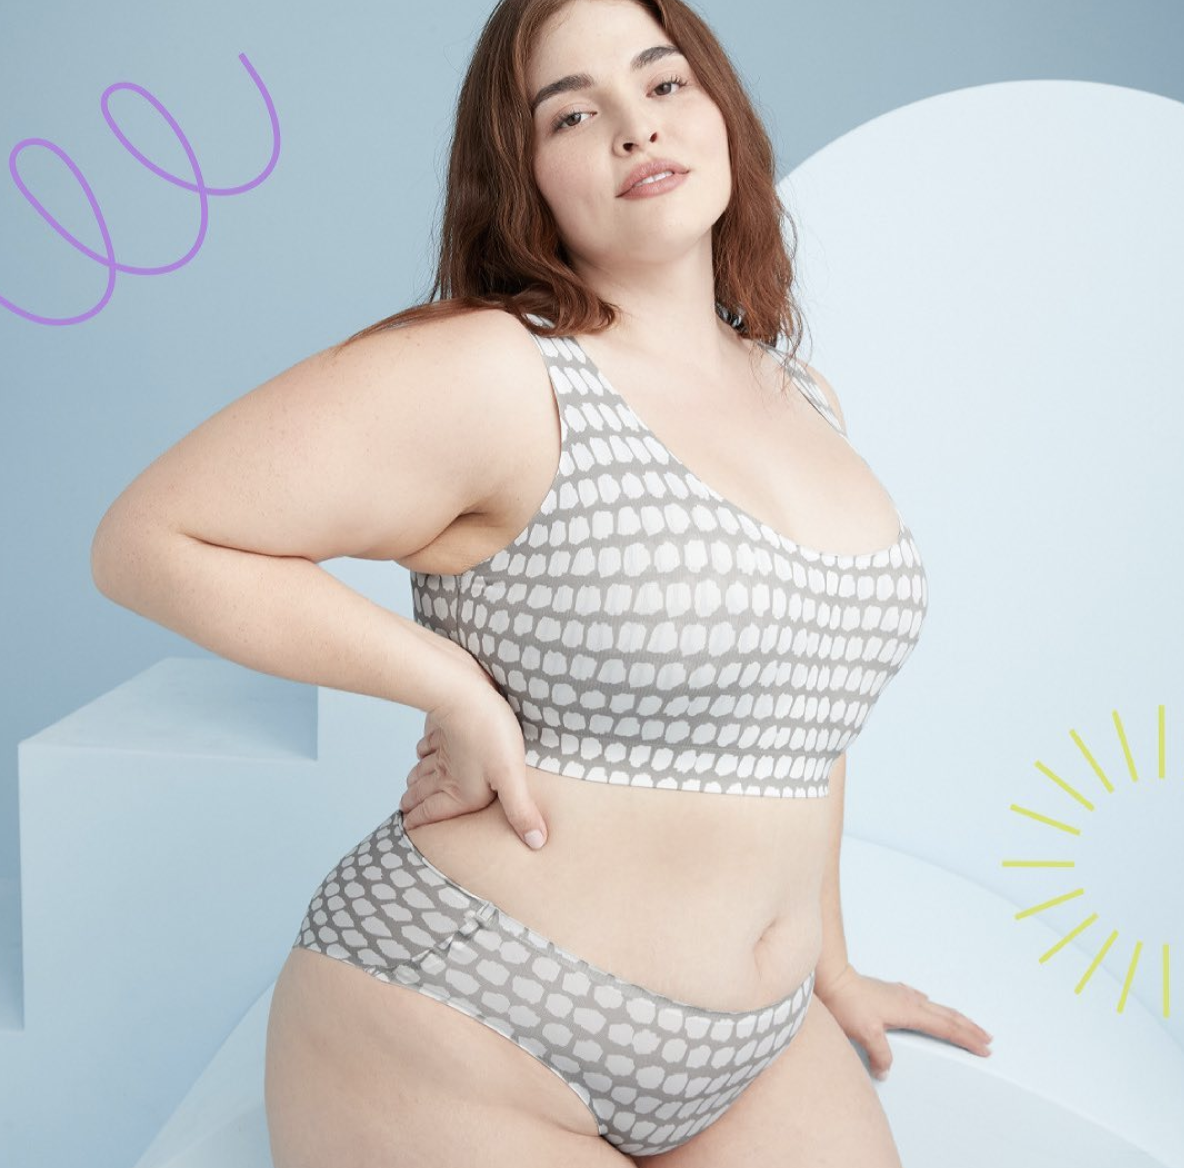 Model wearing gray with white abstract polka dot print underwear and bra  